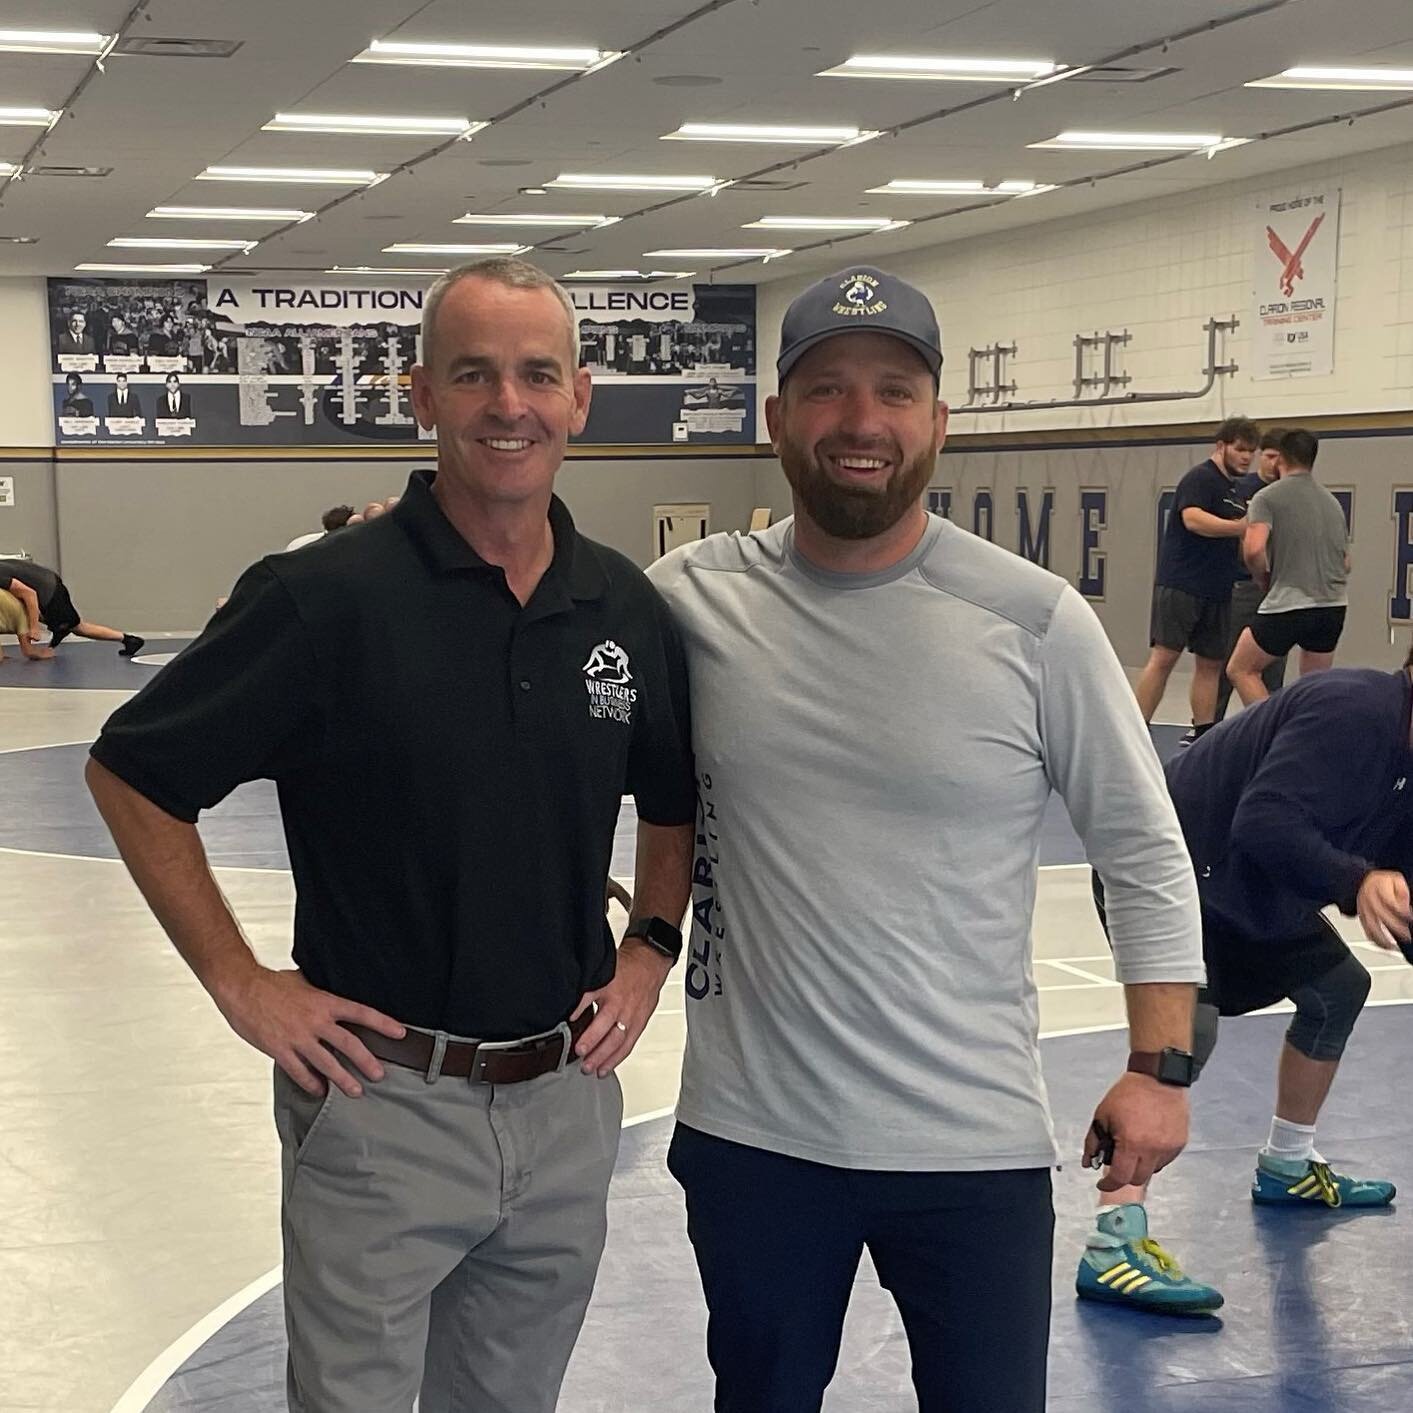 Had a great visit with Coach @Kfer8 at @clarionu .  Coach Ferraro is doing amazing things &amp; is so obviously committed to developing his wrestlers on &amp; off the mat.  He gave me an opportunity to talk to the team about our job board platform. J